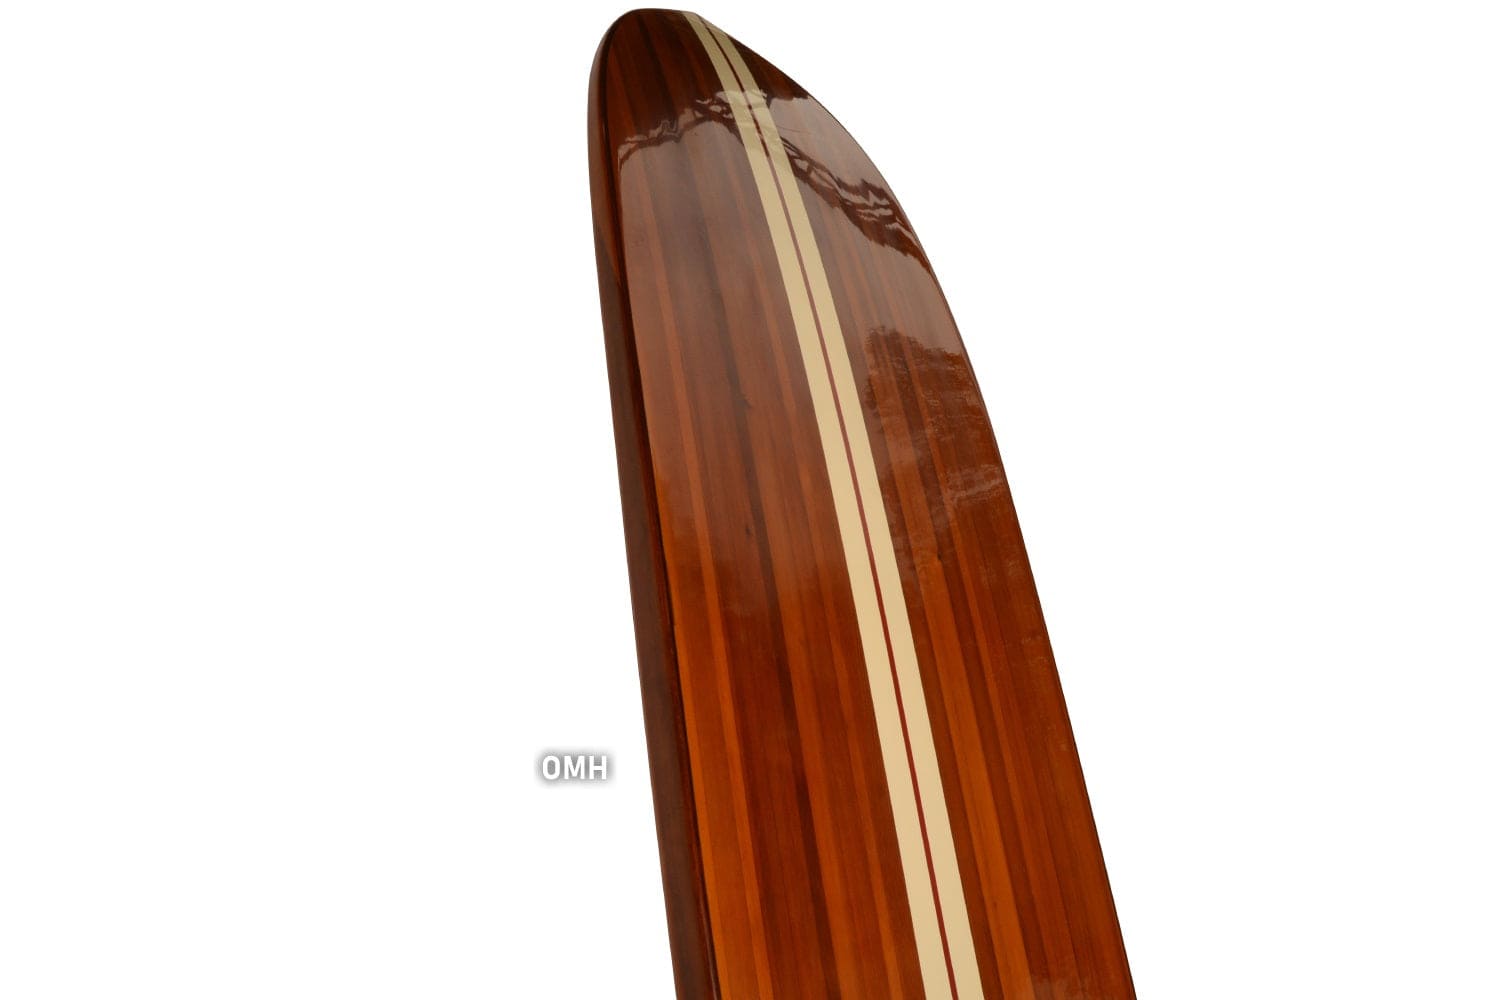 ALDO Creative Arts Collectibles Scale Model Real Fully Functional Paddle Board in Classic Red Cedarwood 11ft with 1 fin